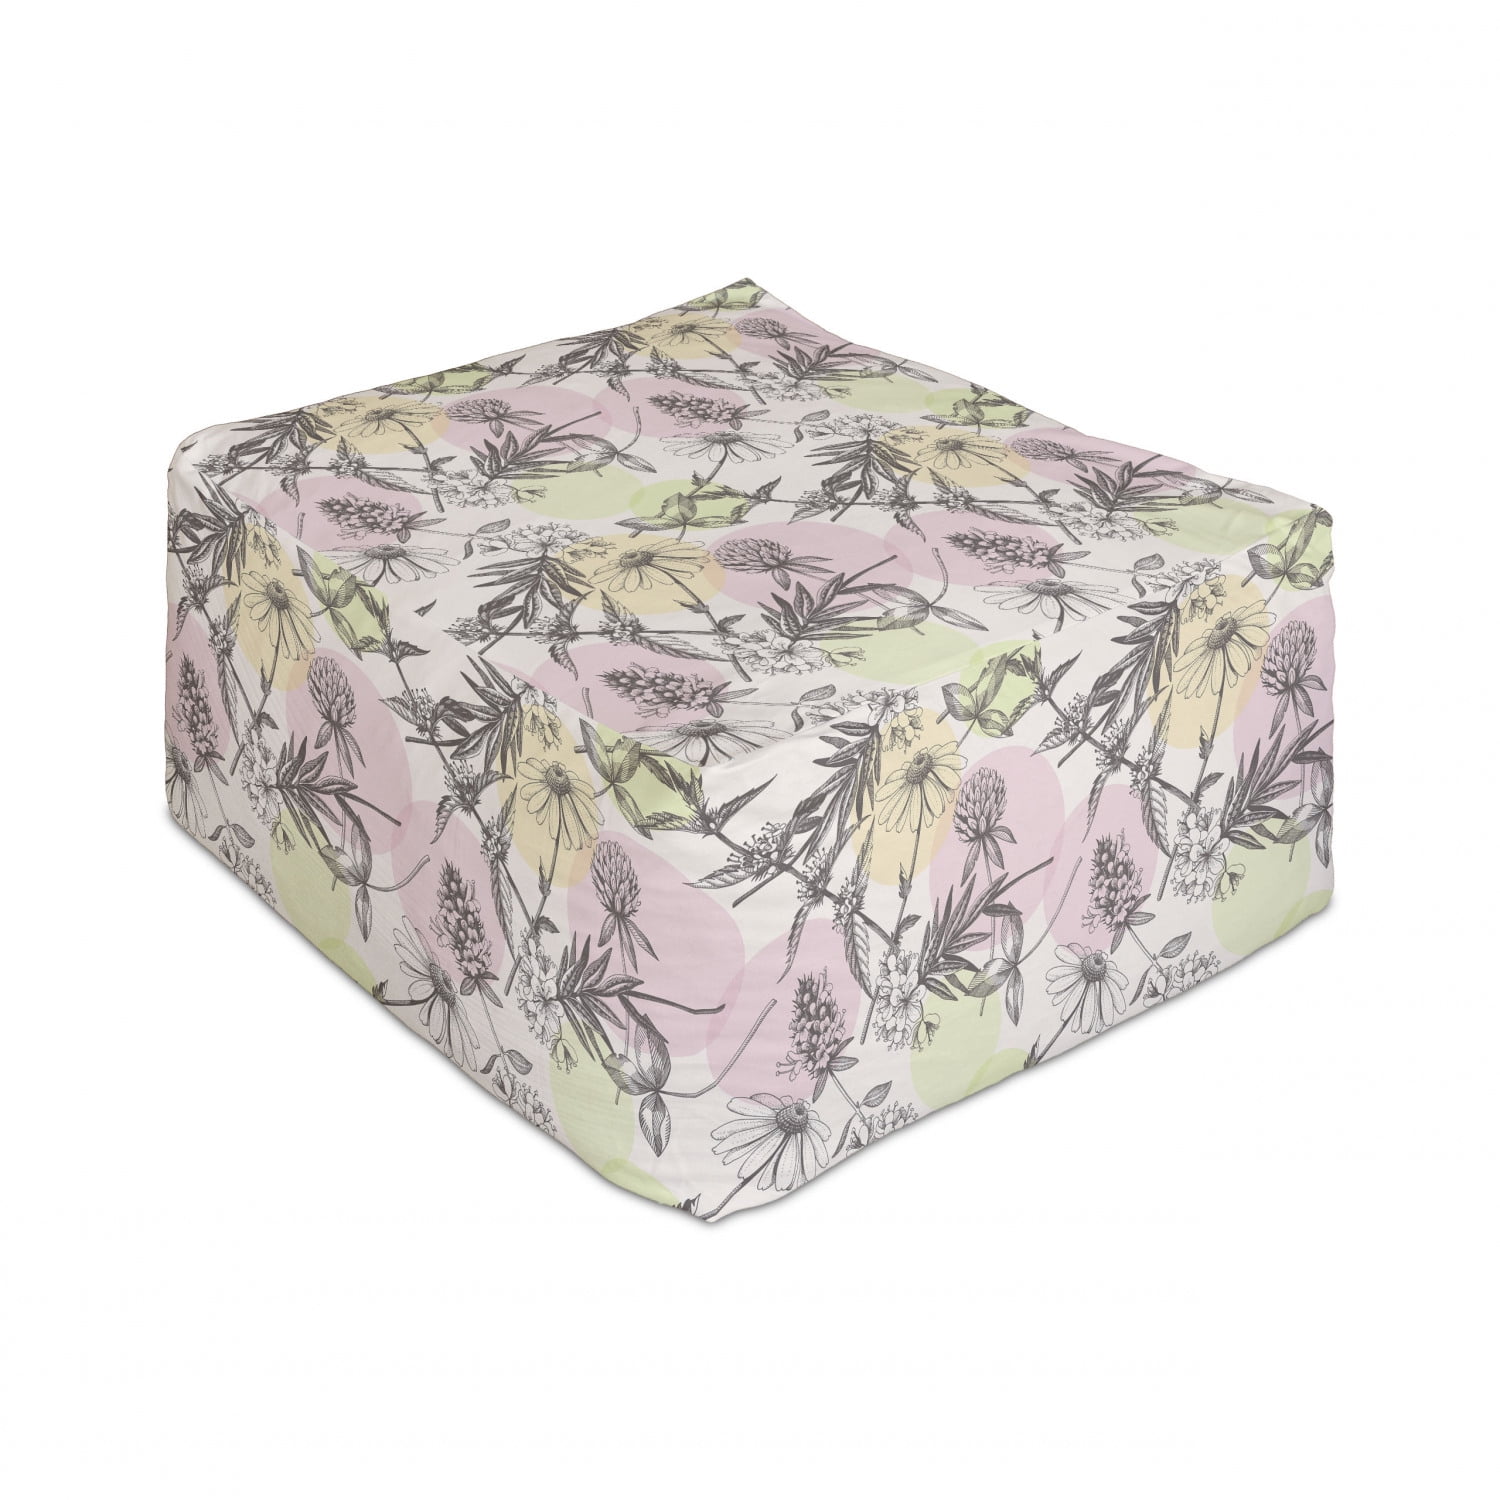 Ambesonne Floral Rectangle Pouf Pastel Green Rose Repetitive Fresh Apples Flowers Soft Pastel Tones Print 25 Under Desk Foot Stool for Living Room Office Ottoman with Cover